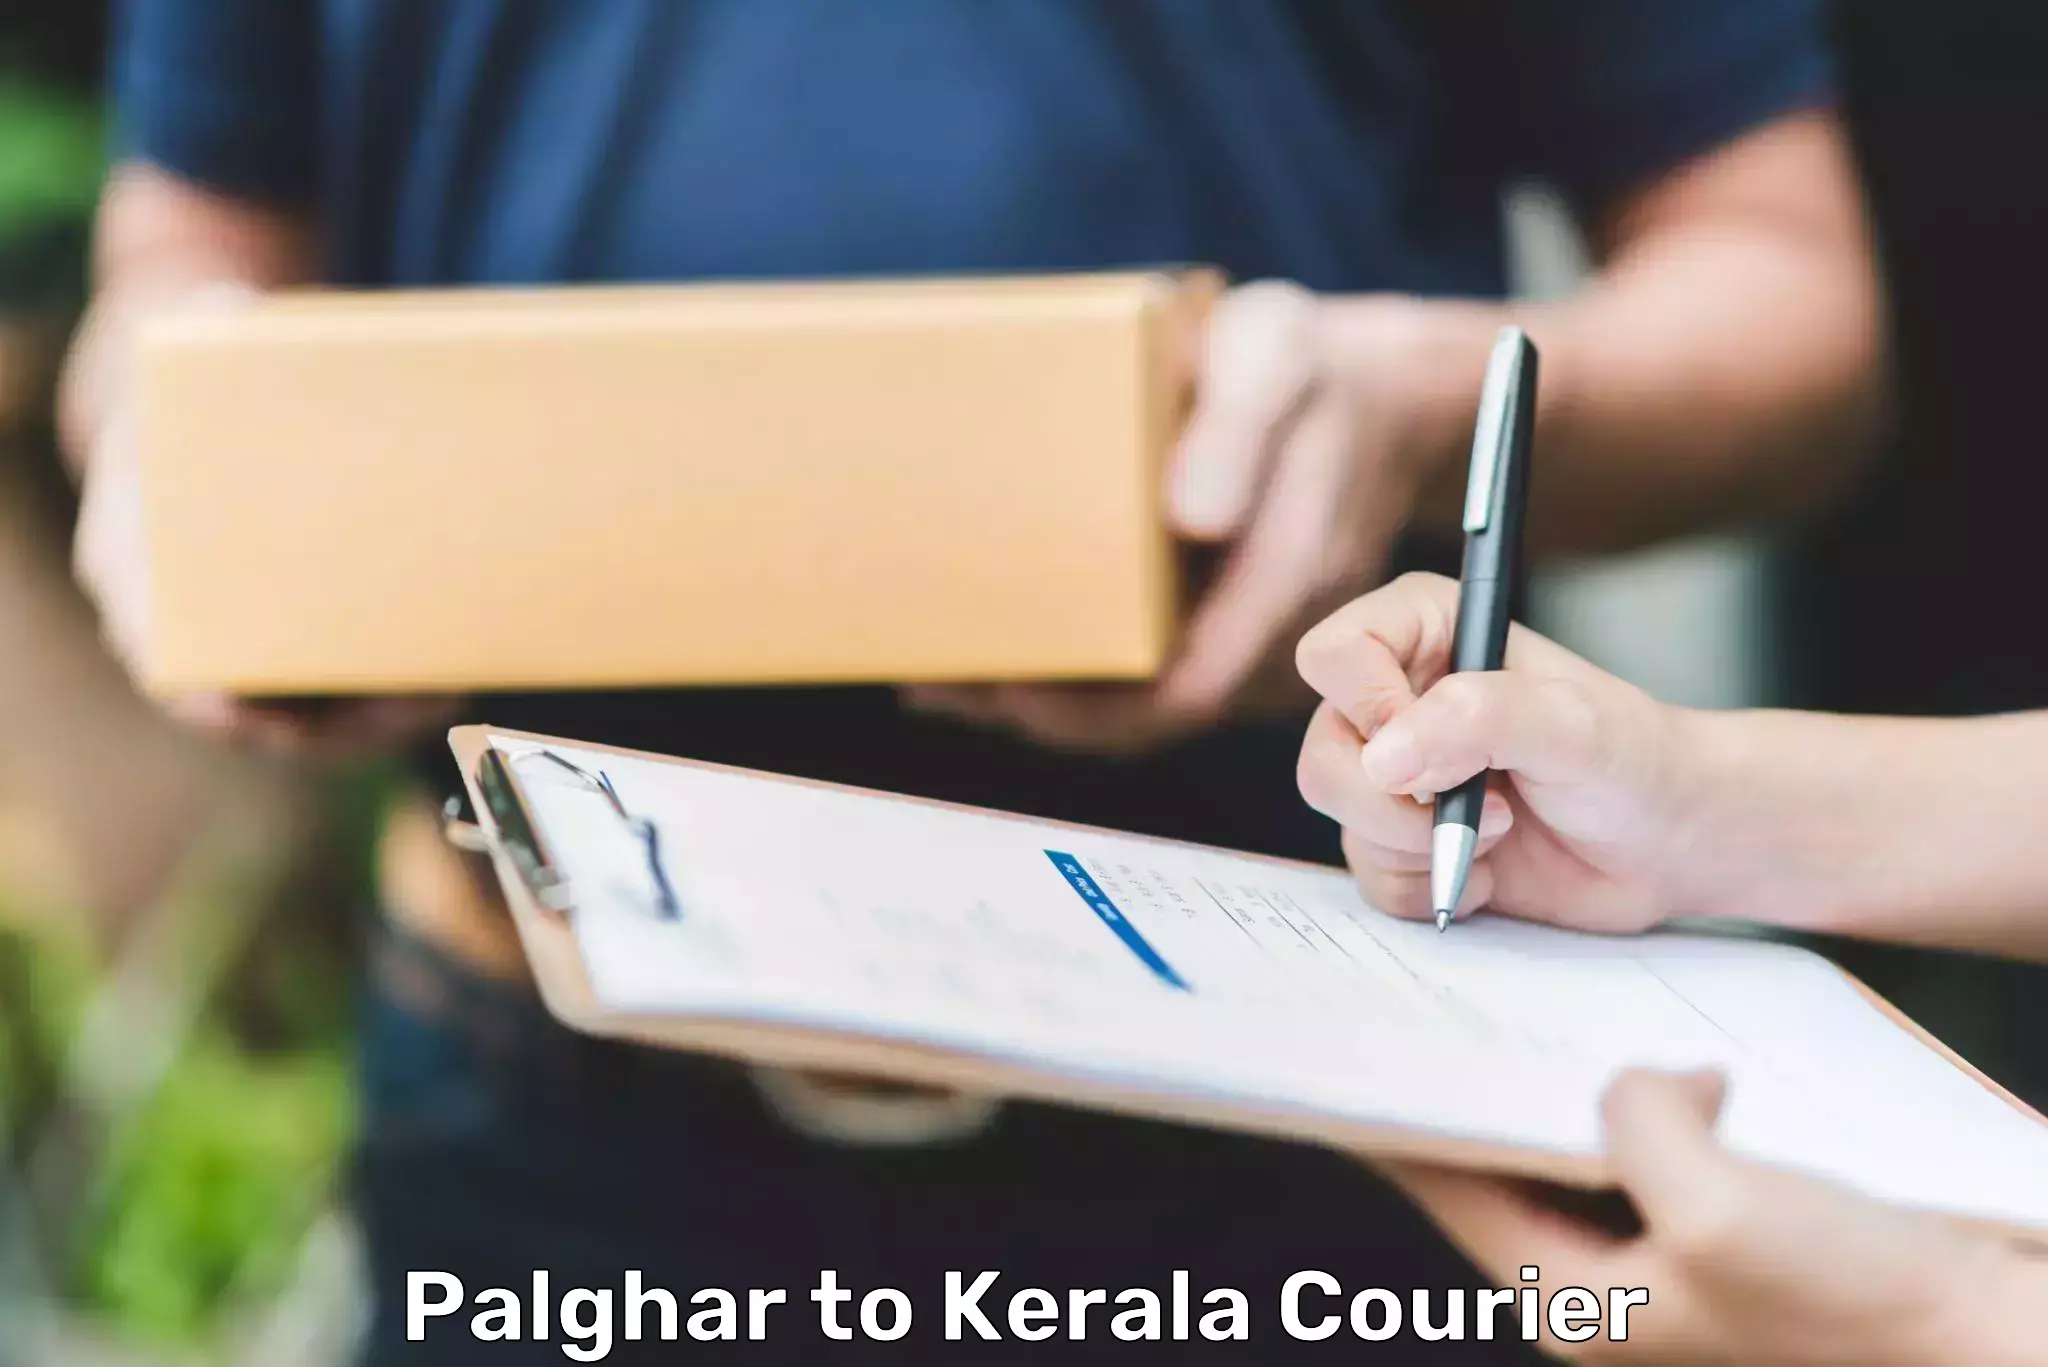 Reliable delivery network Palghar to Thiruvananthapuram